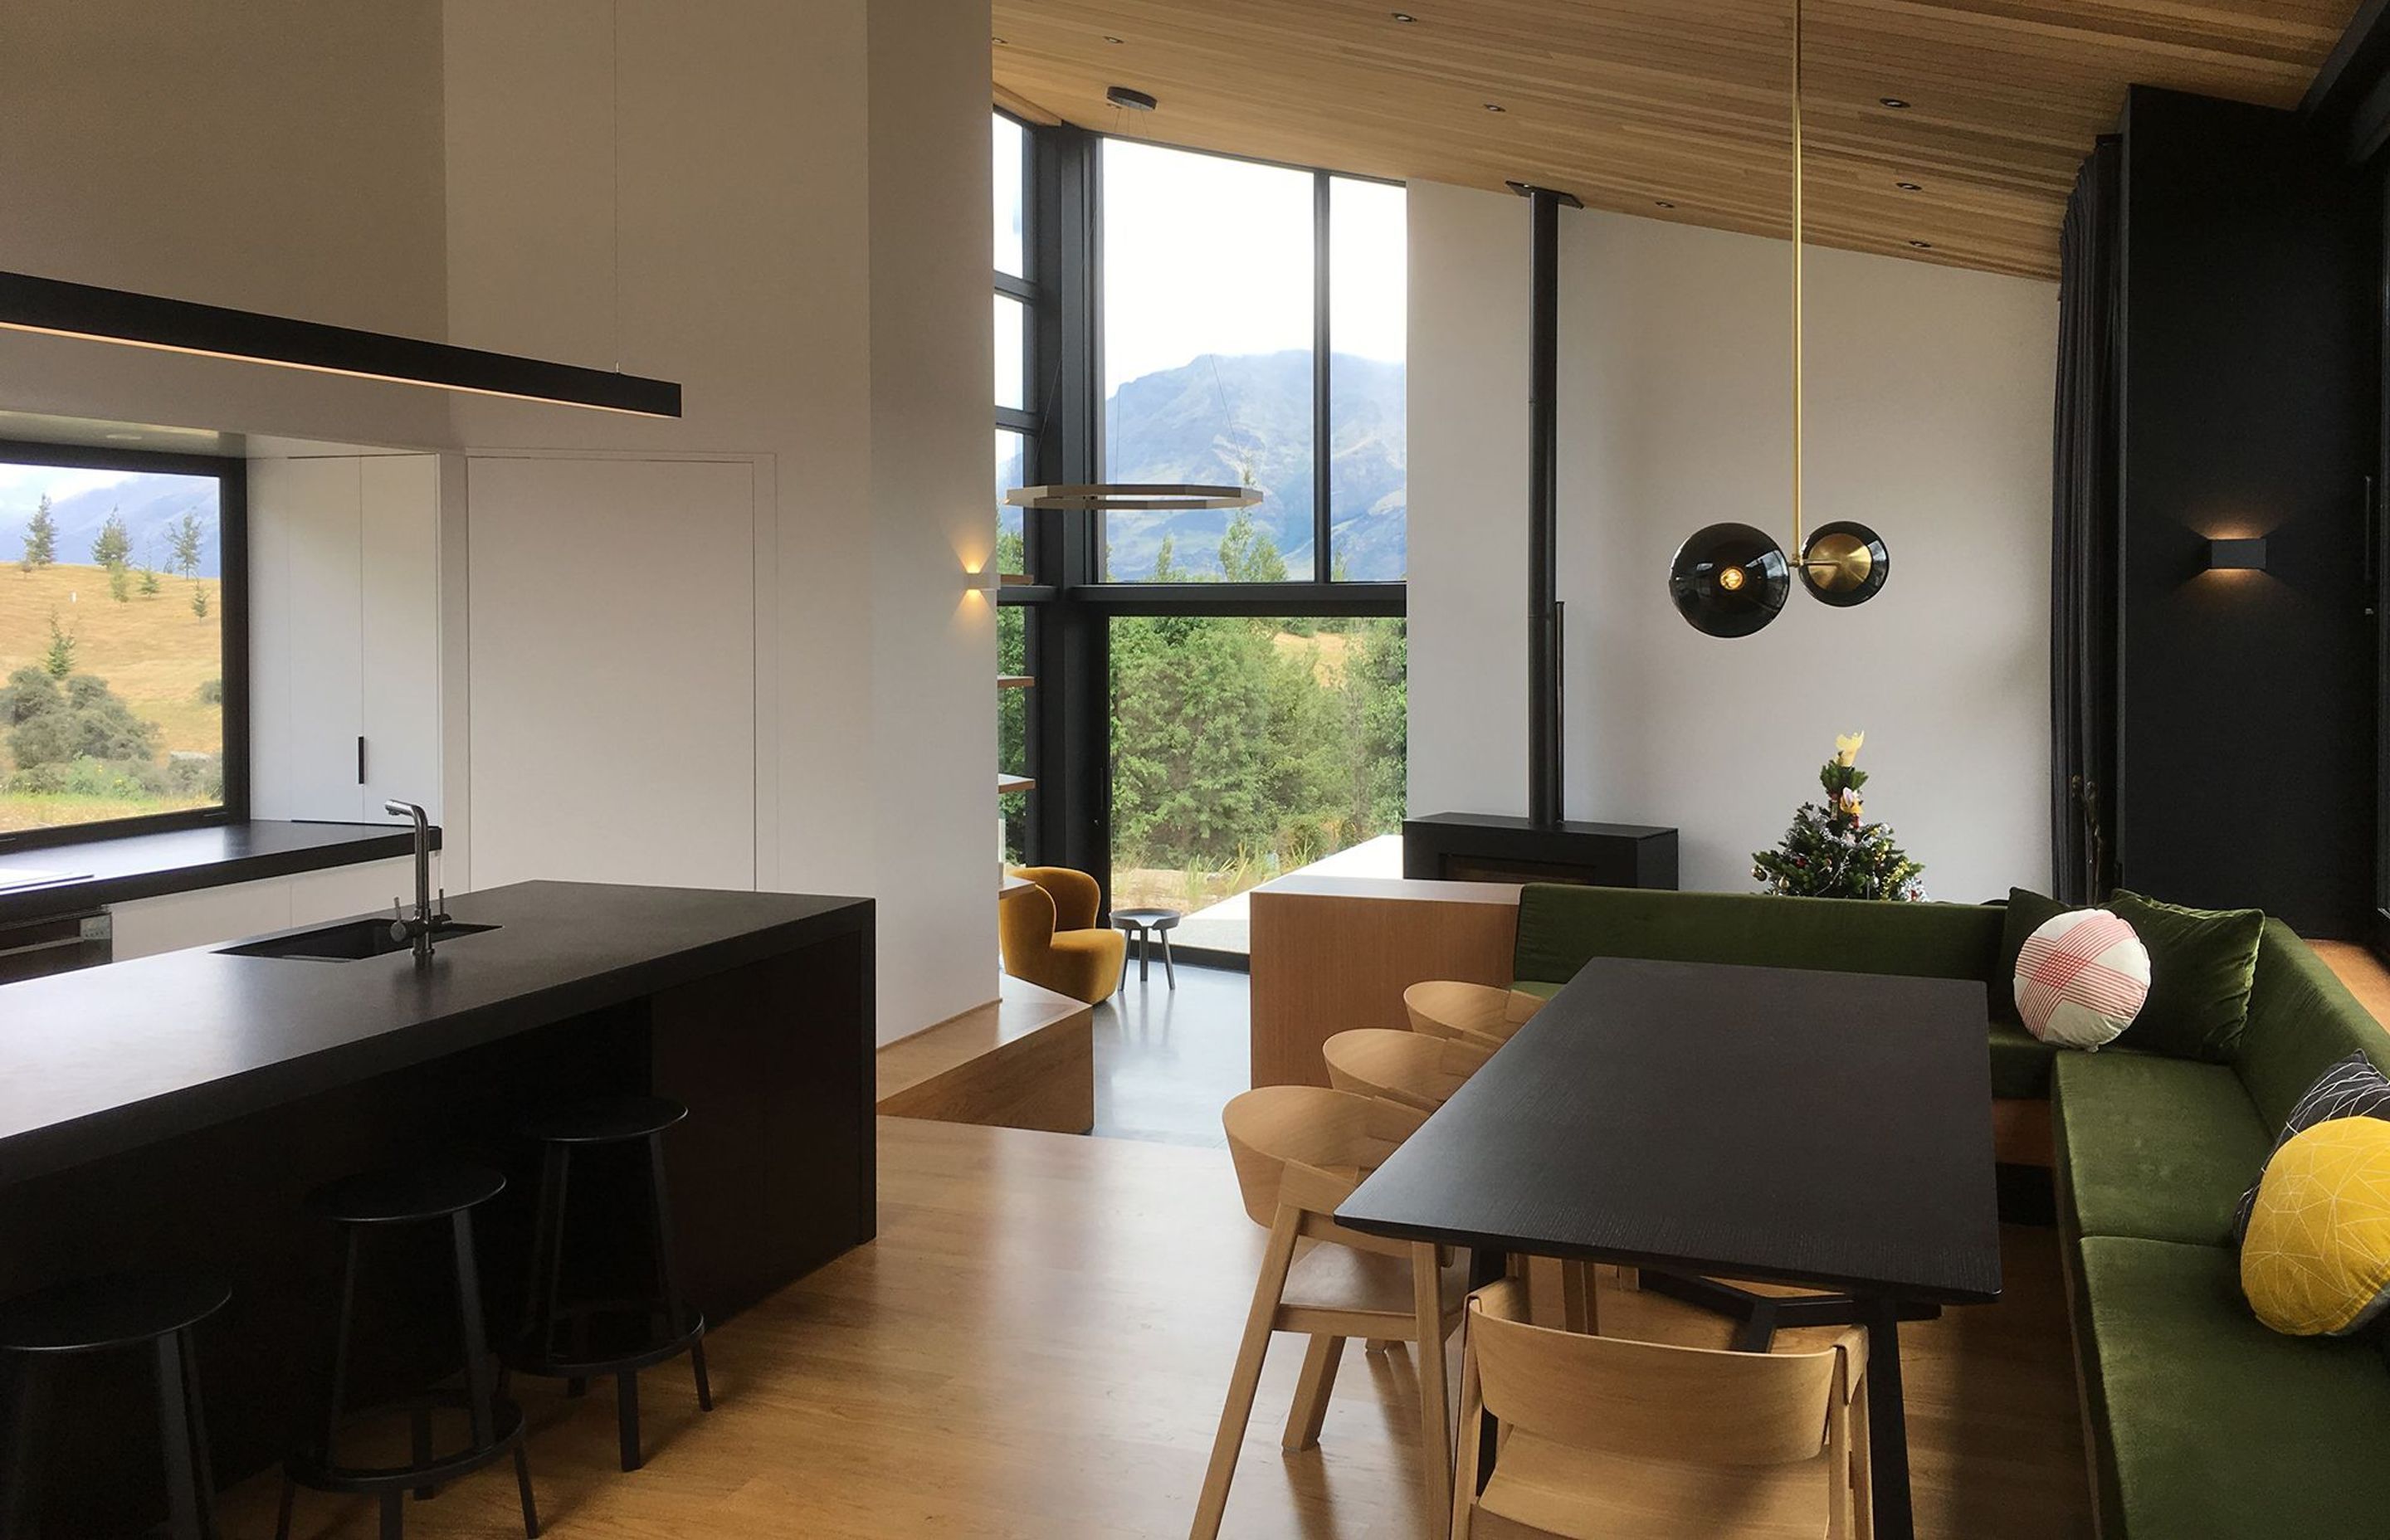 The kitchen and dining area overlooks the lounge area on a lower level. and forms a direct relationship with the landscape.